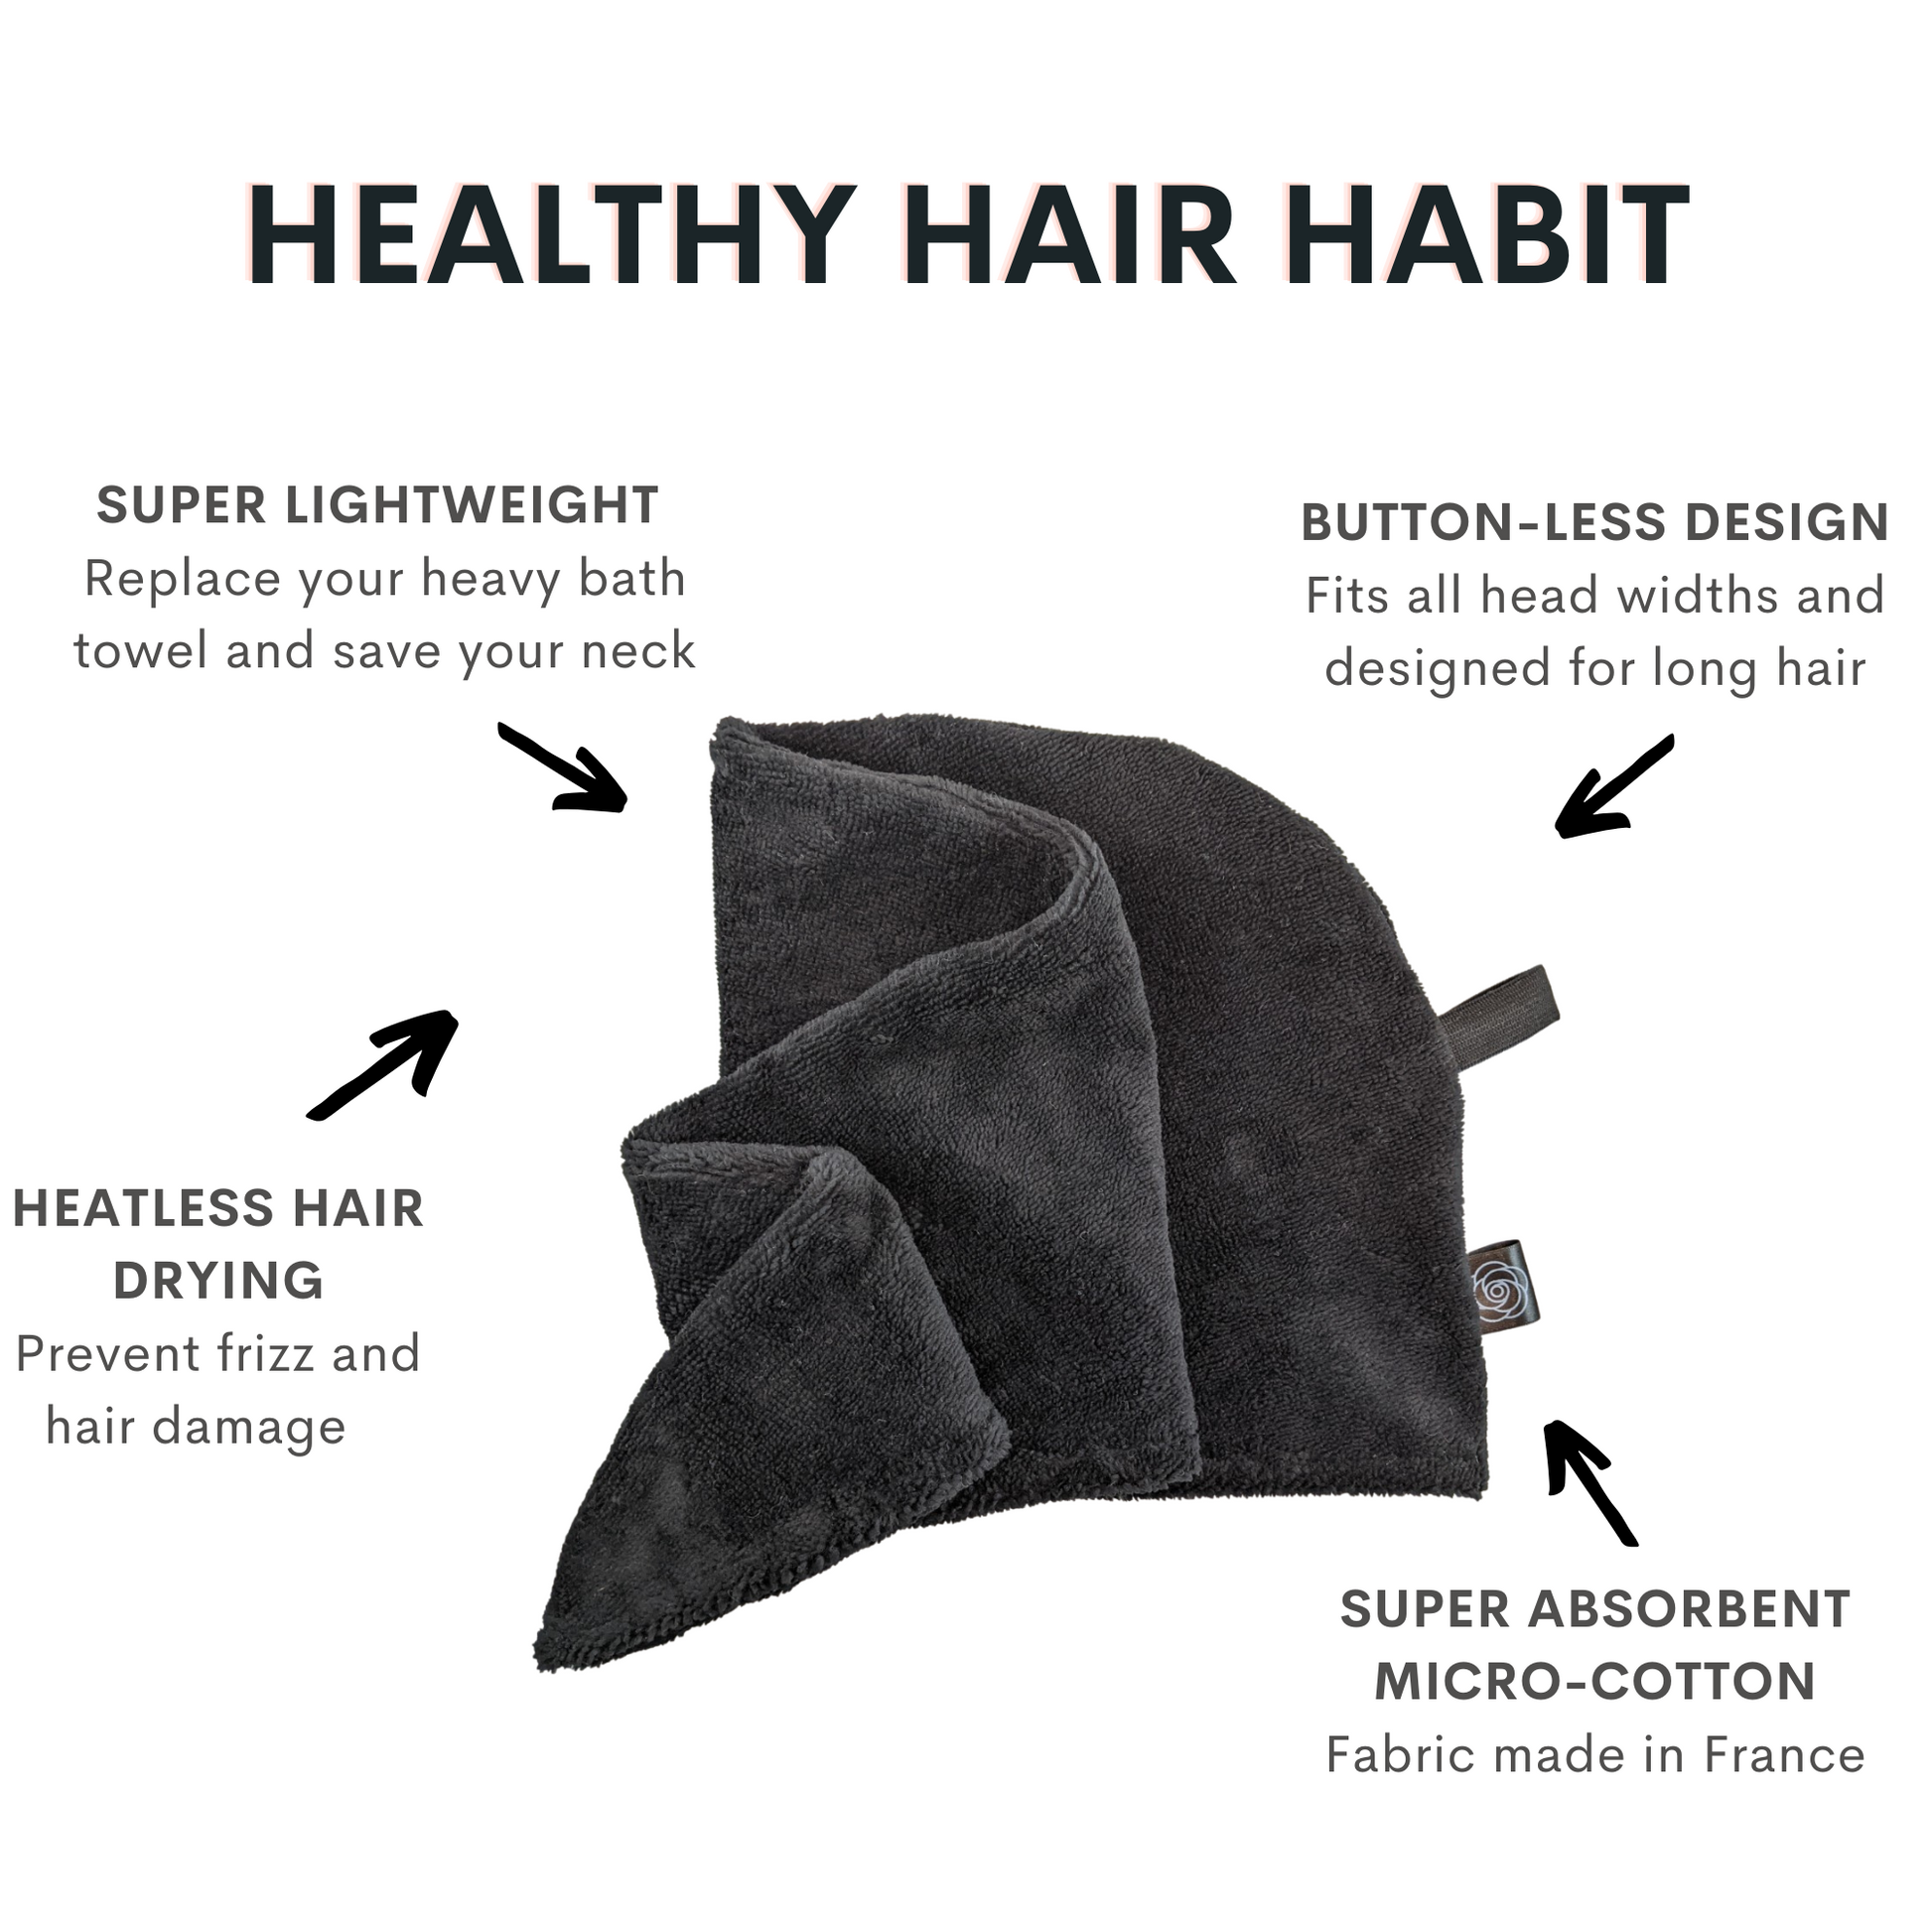 healthy hair habit use a hair towel made in canada super light weight heatless hair drying and one size fits all